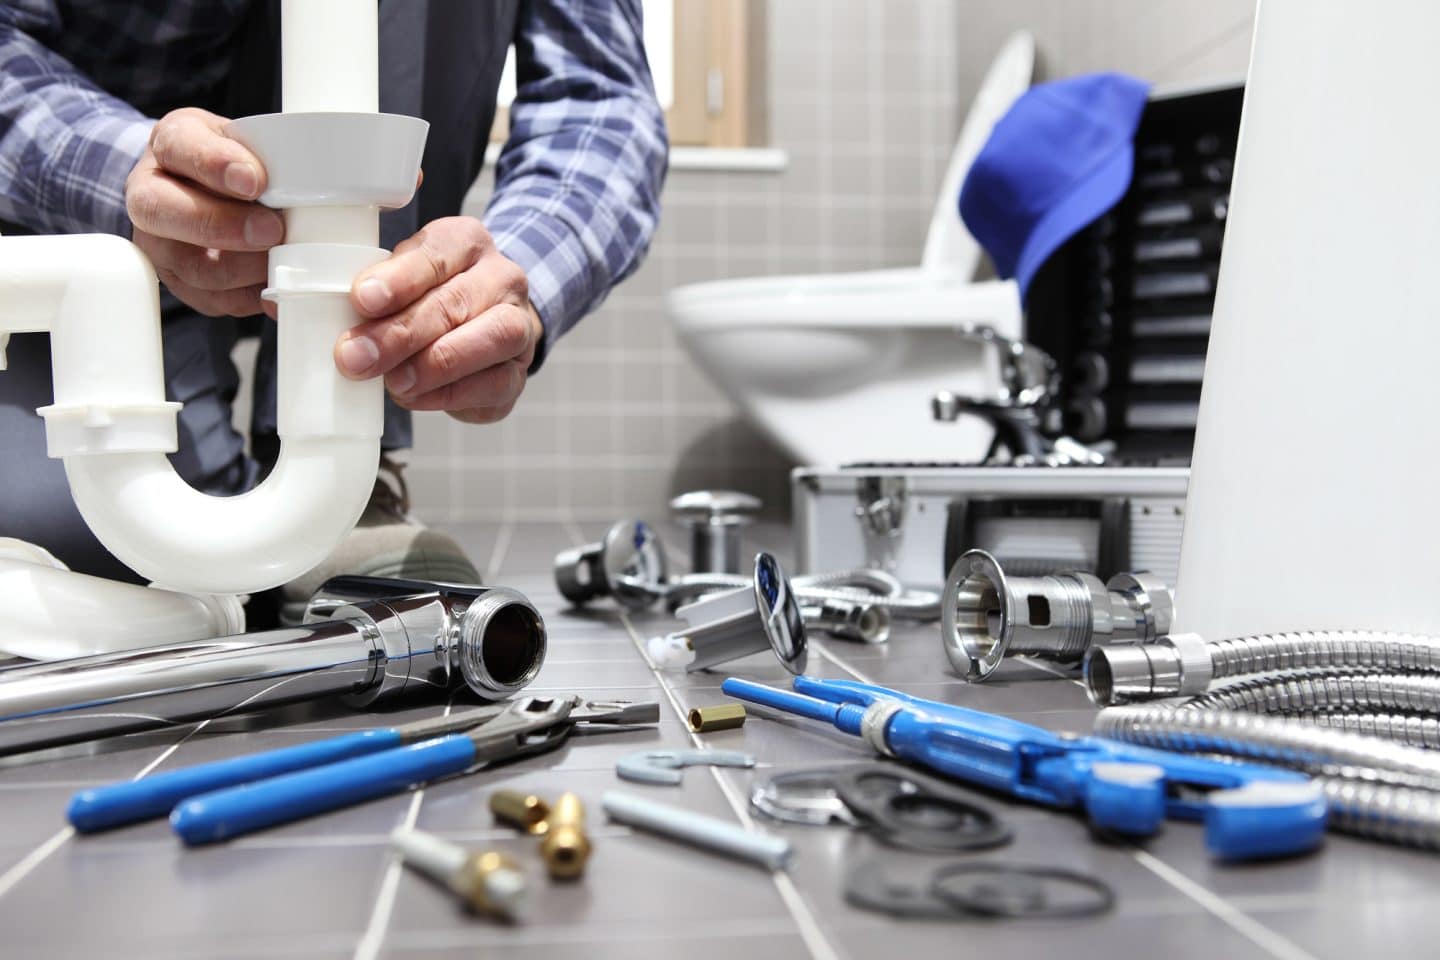 How Does Your Home Plumbing System Work?